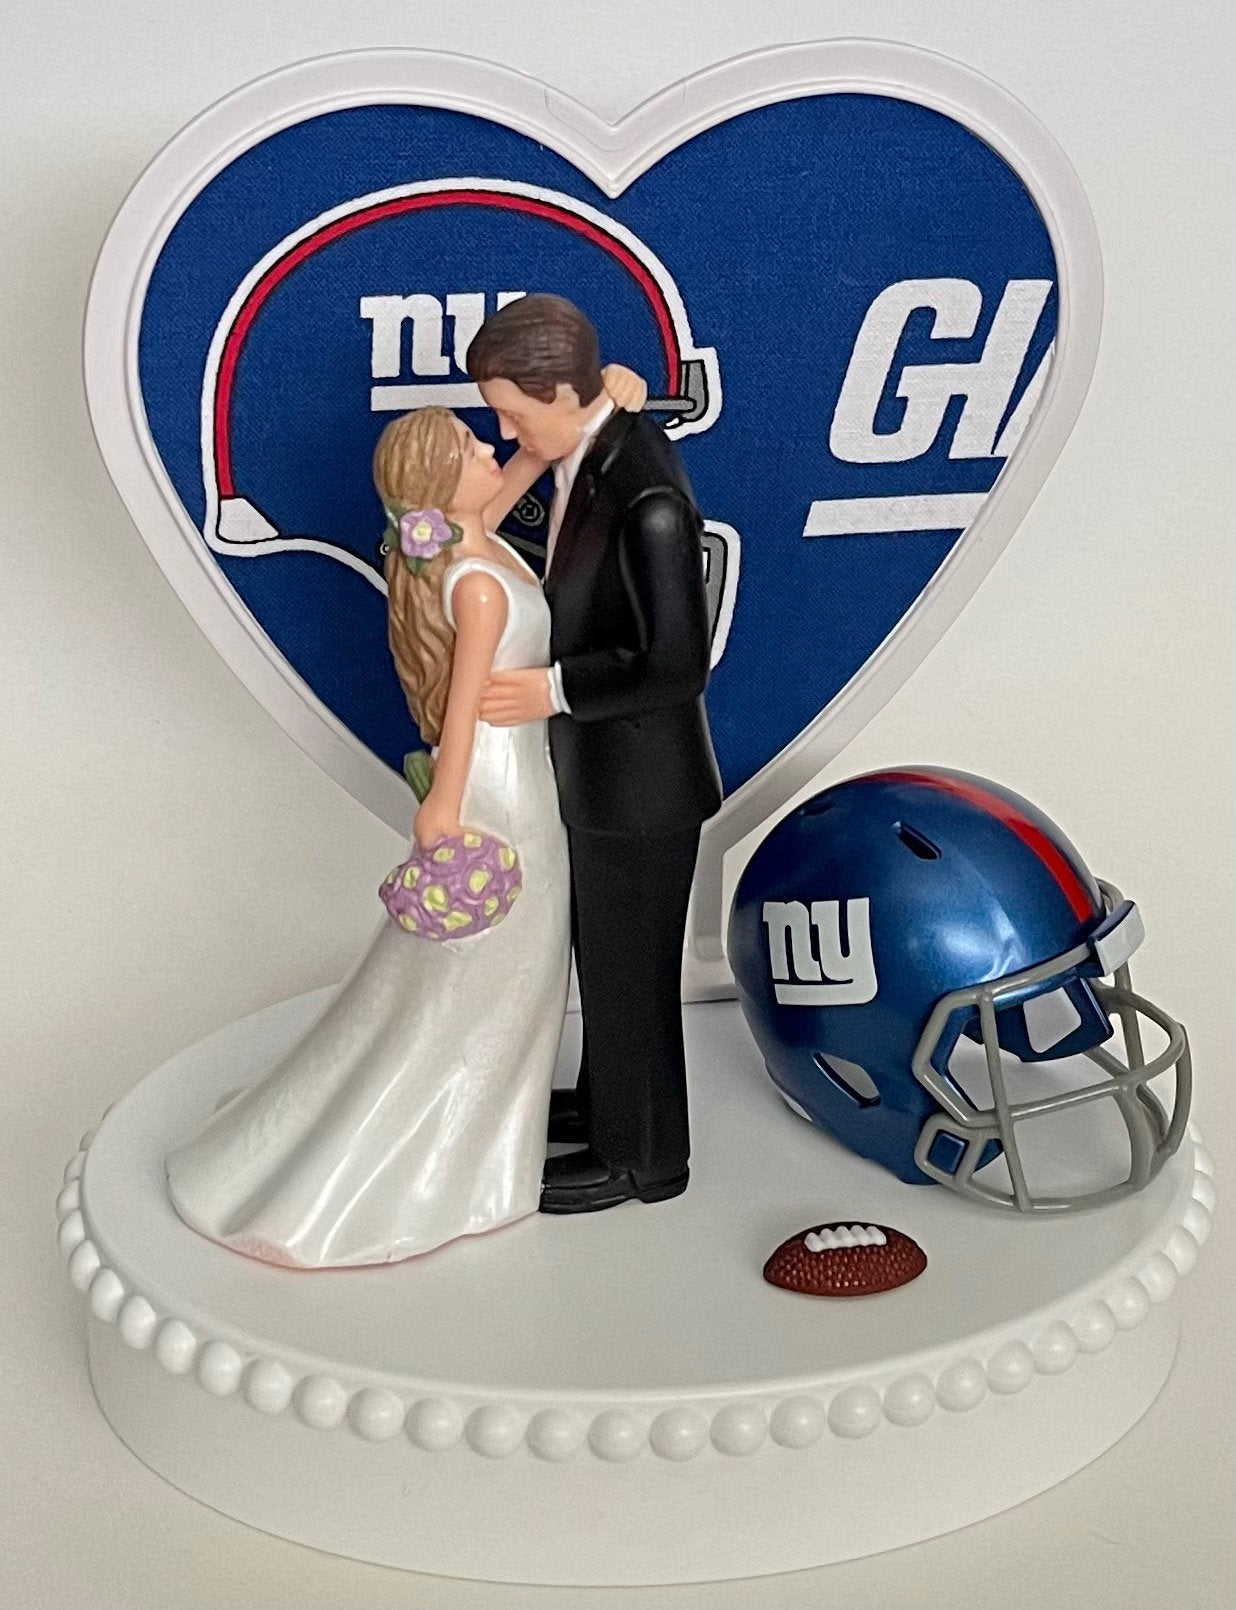 Wedding Cake Topper New York Giants NY Football Themed Beautiful Long-Haired Bride Groom Sports Fans One-of-a-Kind Reception Bridal Gift